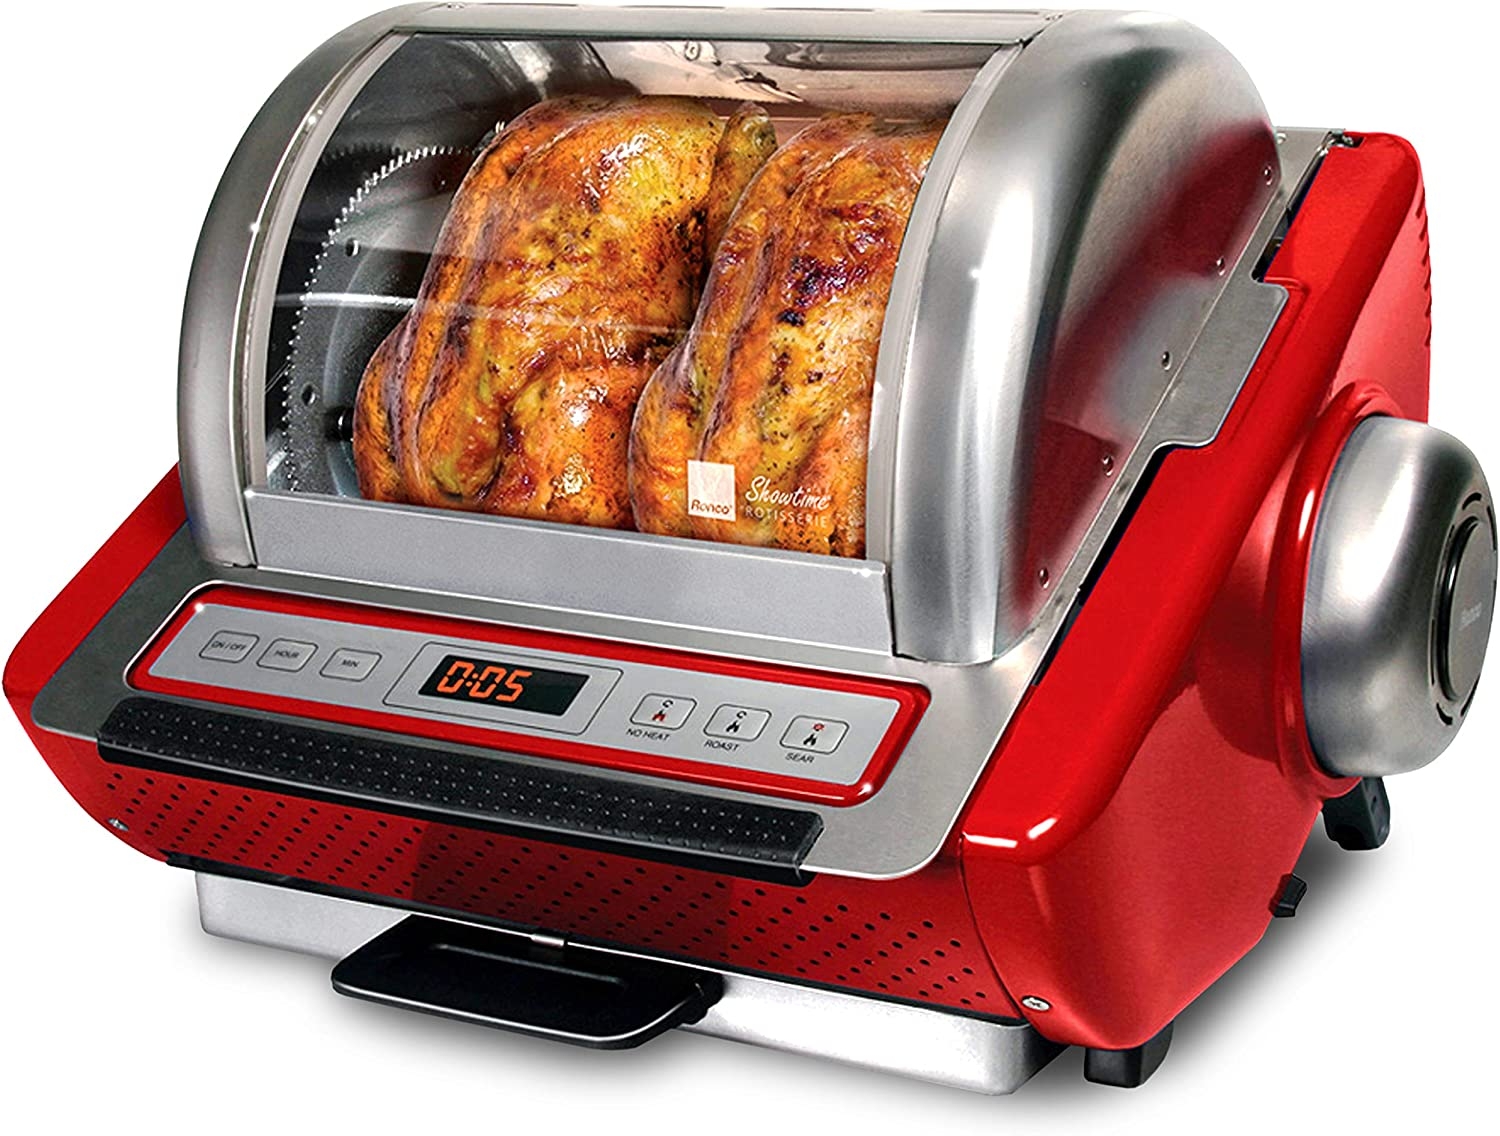 Ronco EZ-Store Rotisserie Oven, Gourmet Cooking at Home, Cooks Perfectly Roasted Chickens, Turkey, Pork, Roasts & Burgers, Large